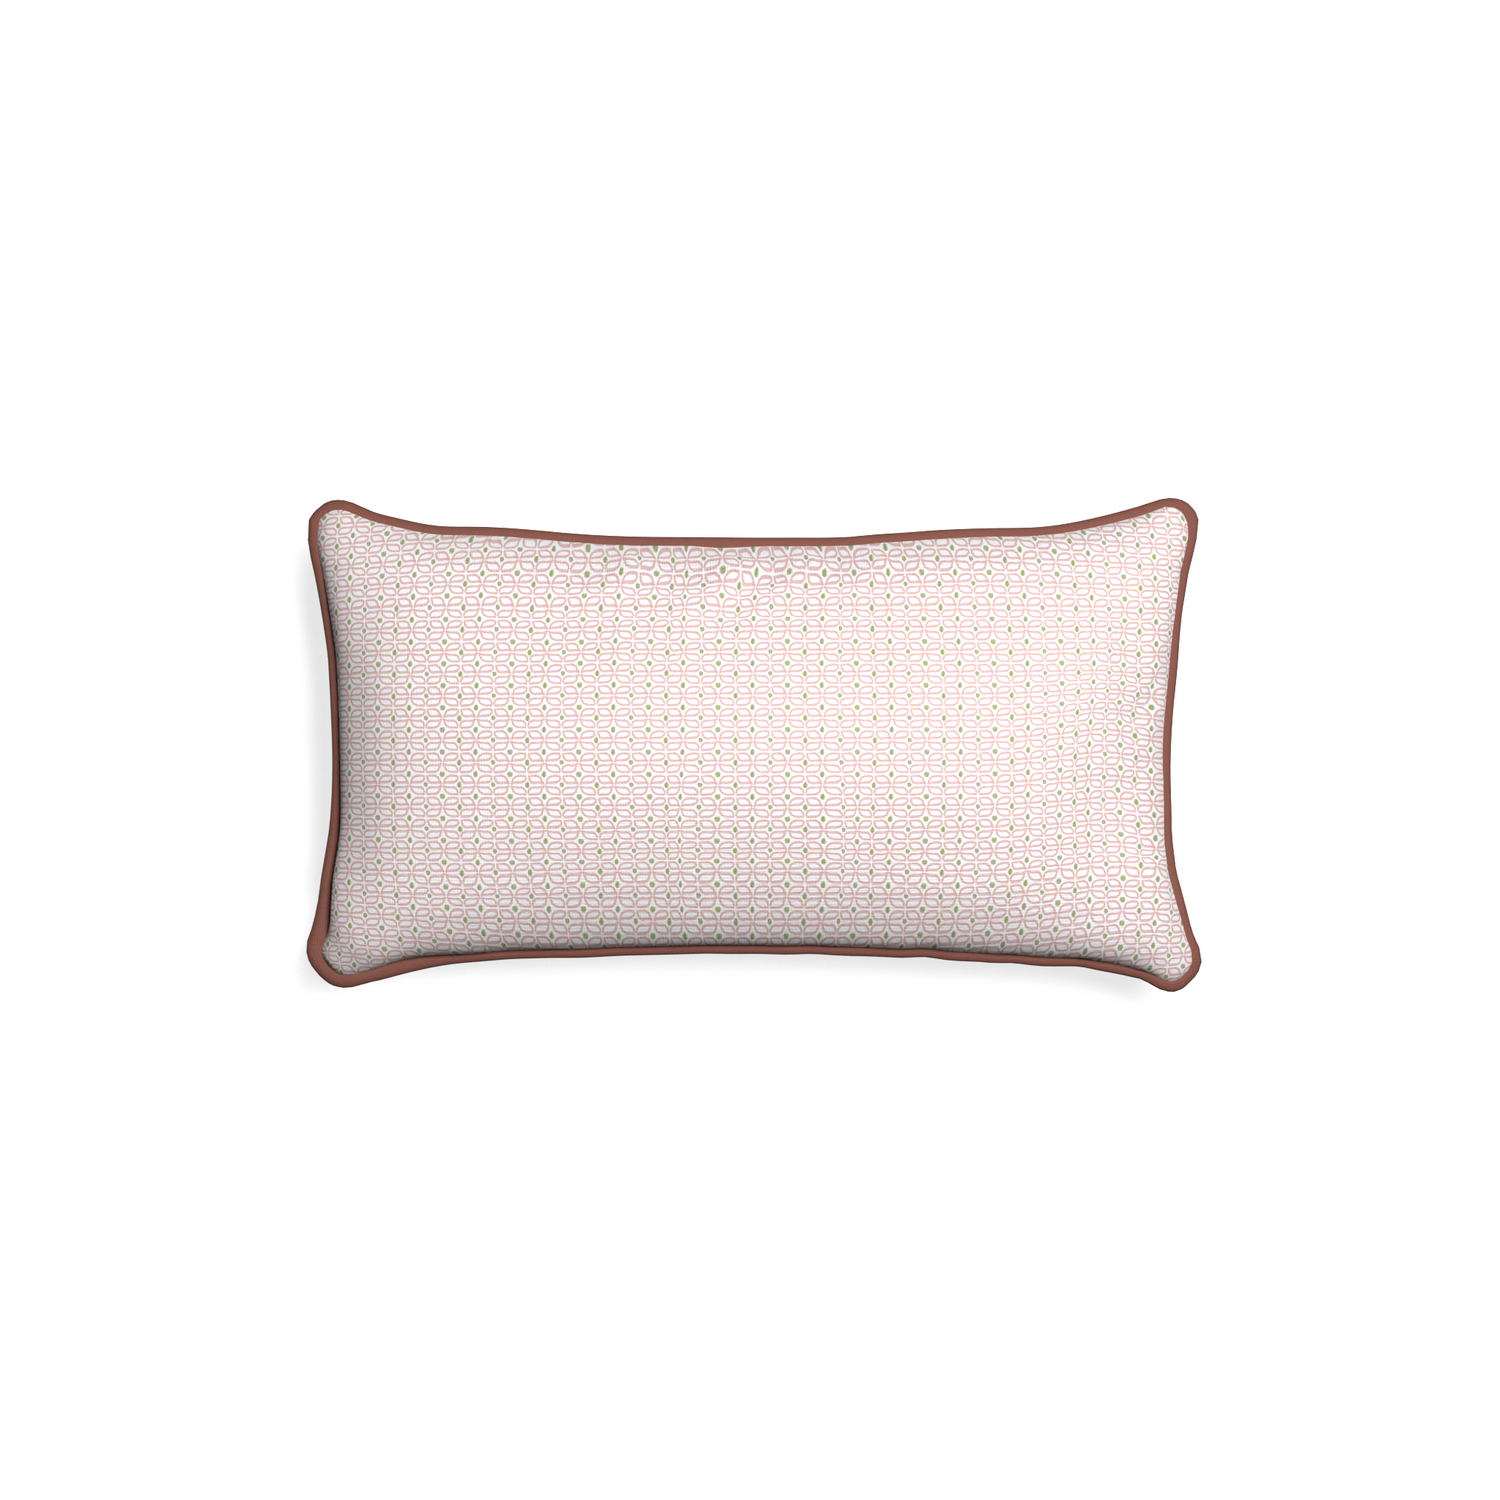 Petite-lumbar loomi pink custom pink geometricpillow with w piping on white background